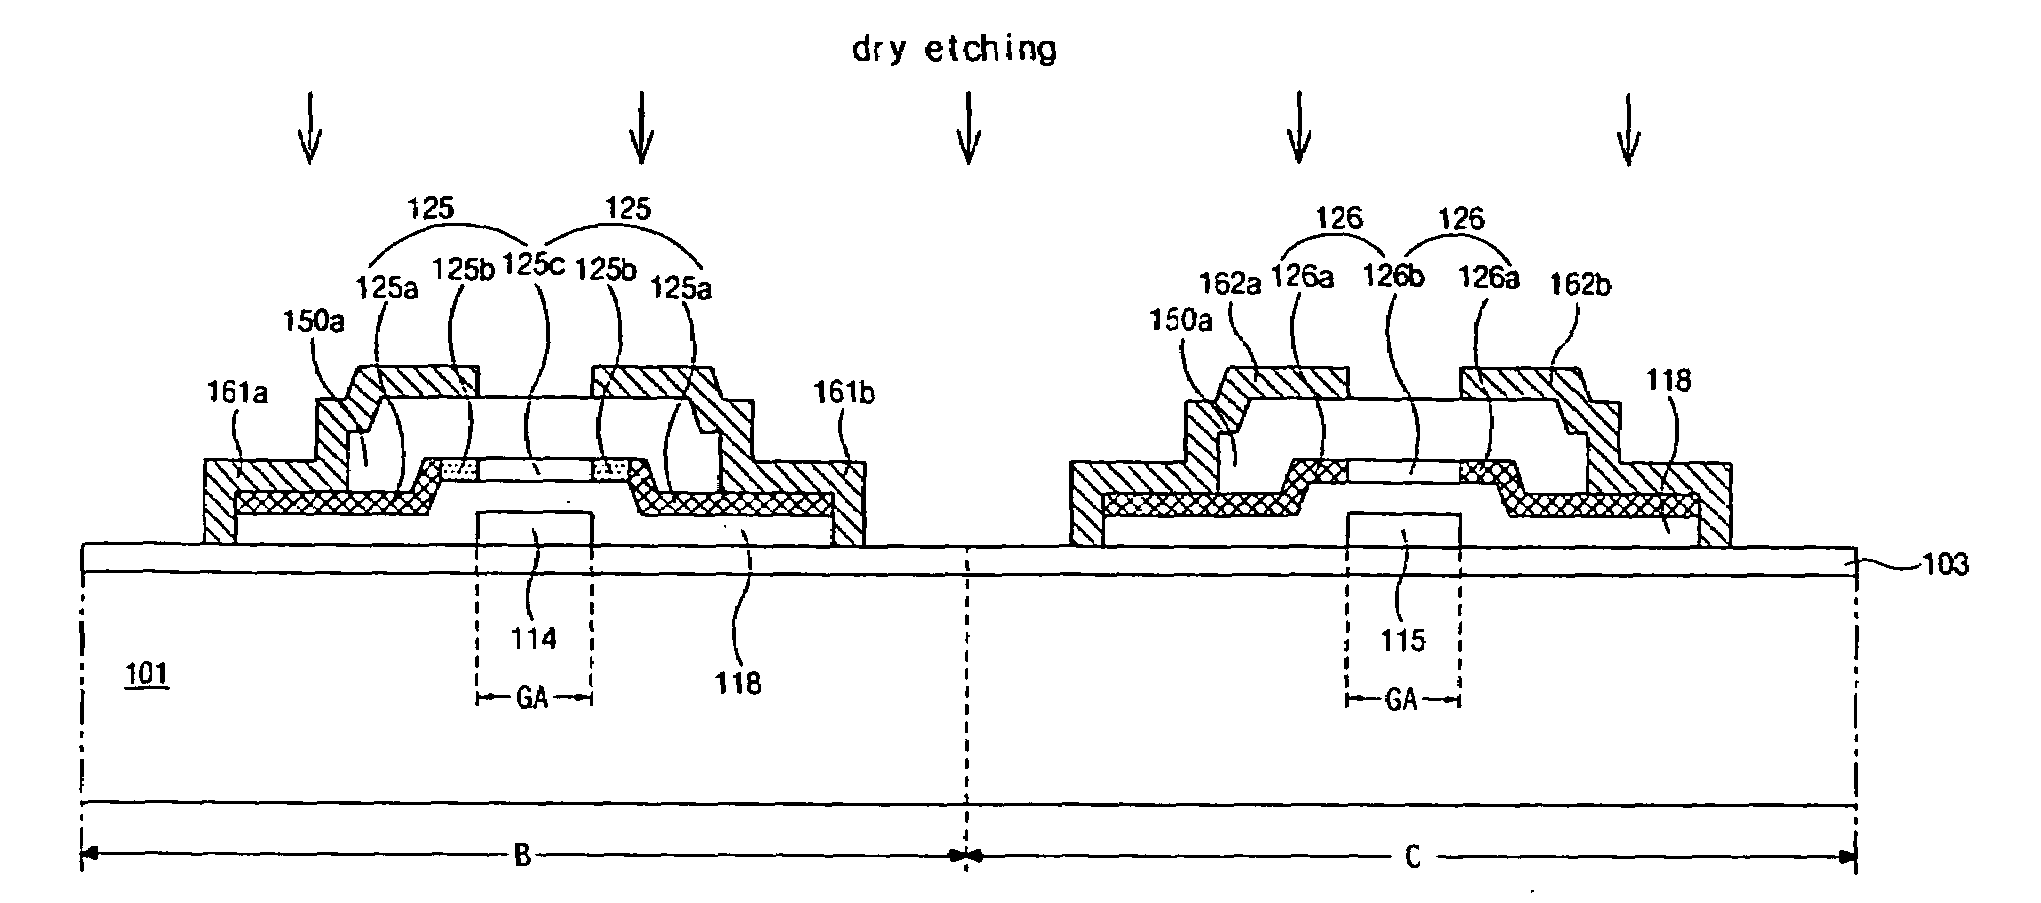 Liquid crystal display device including driving circuit and method of fabricating the same